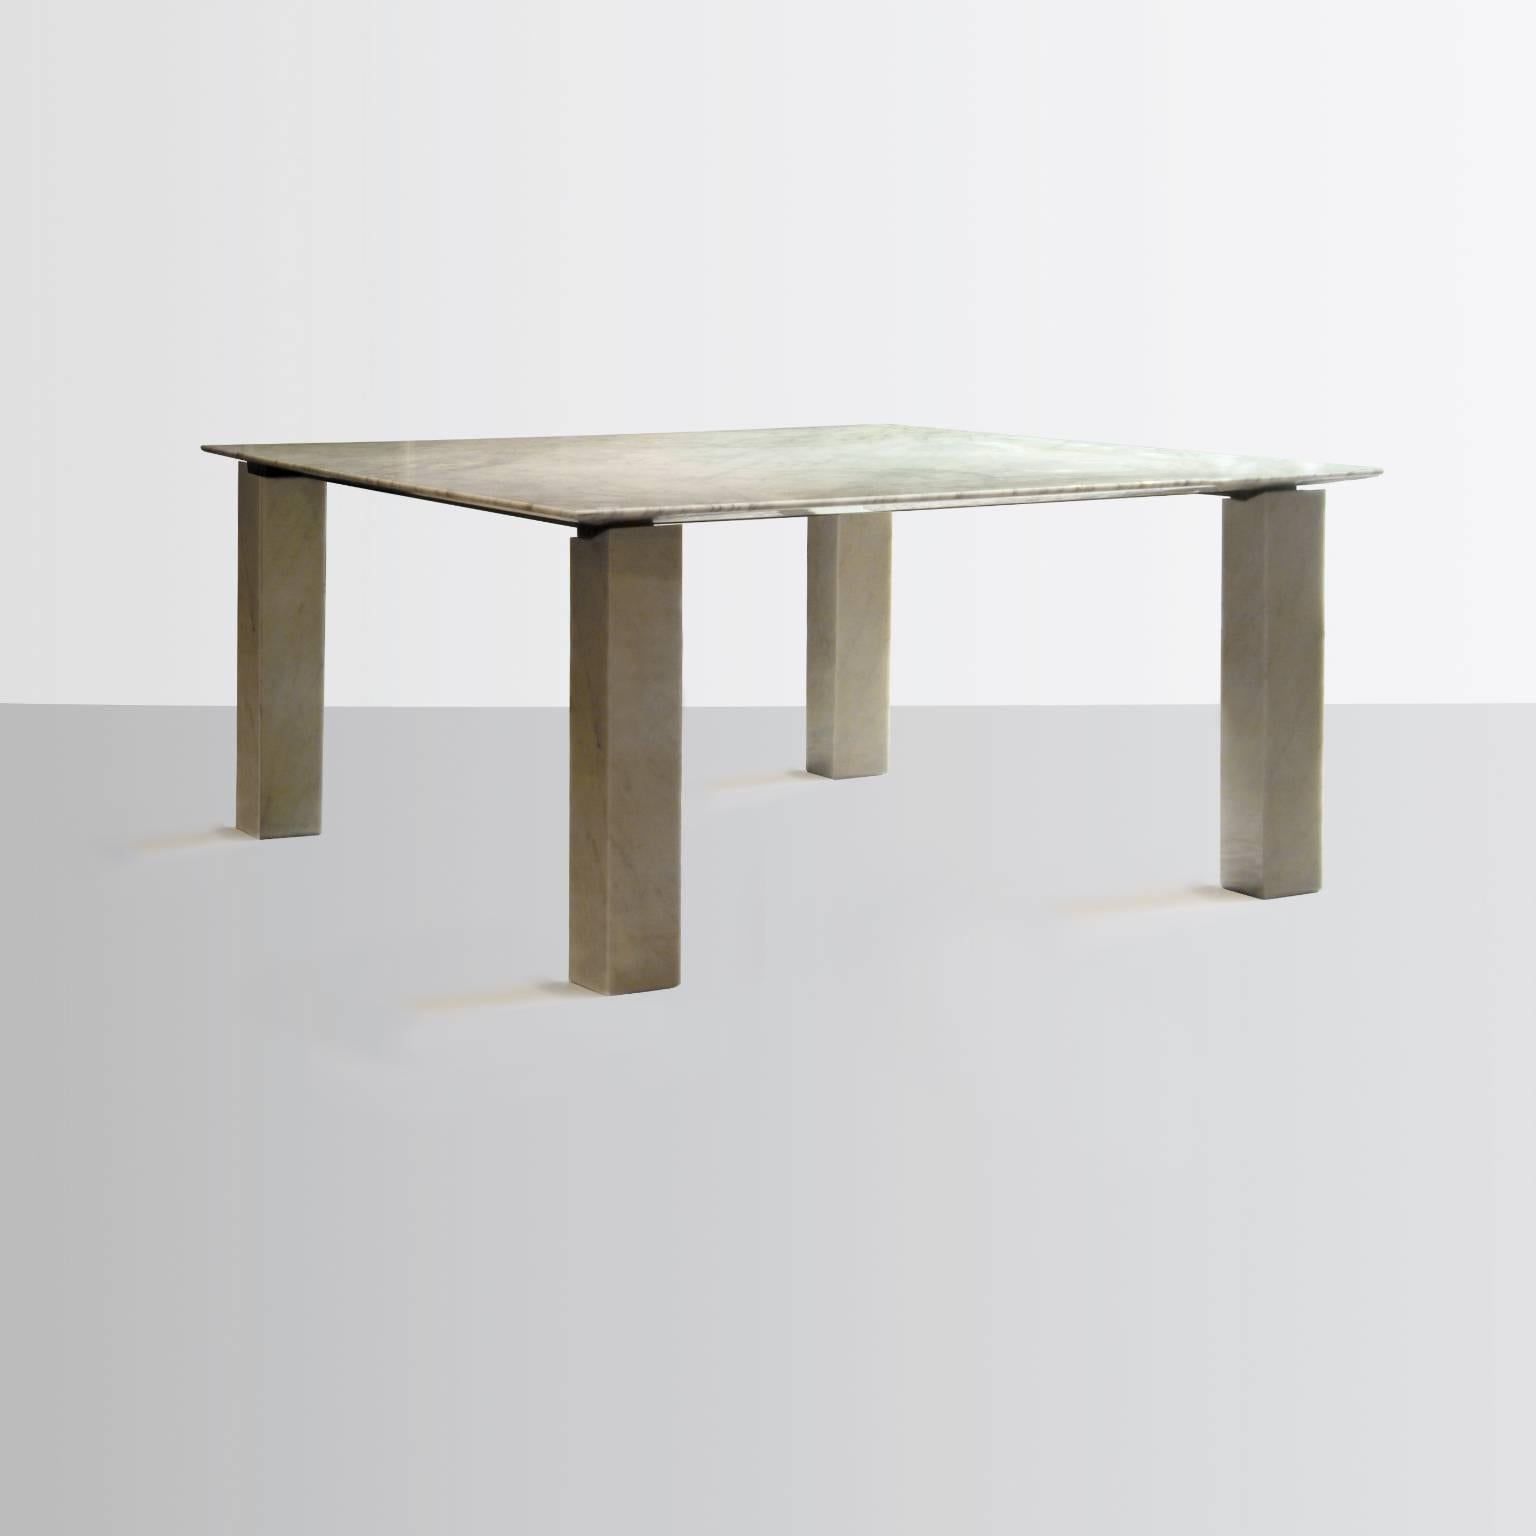 Postmodern Carrara-marble dining table, attributed to Cappellini, Milano, circa 1980.